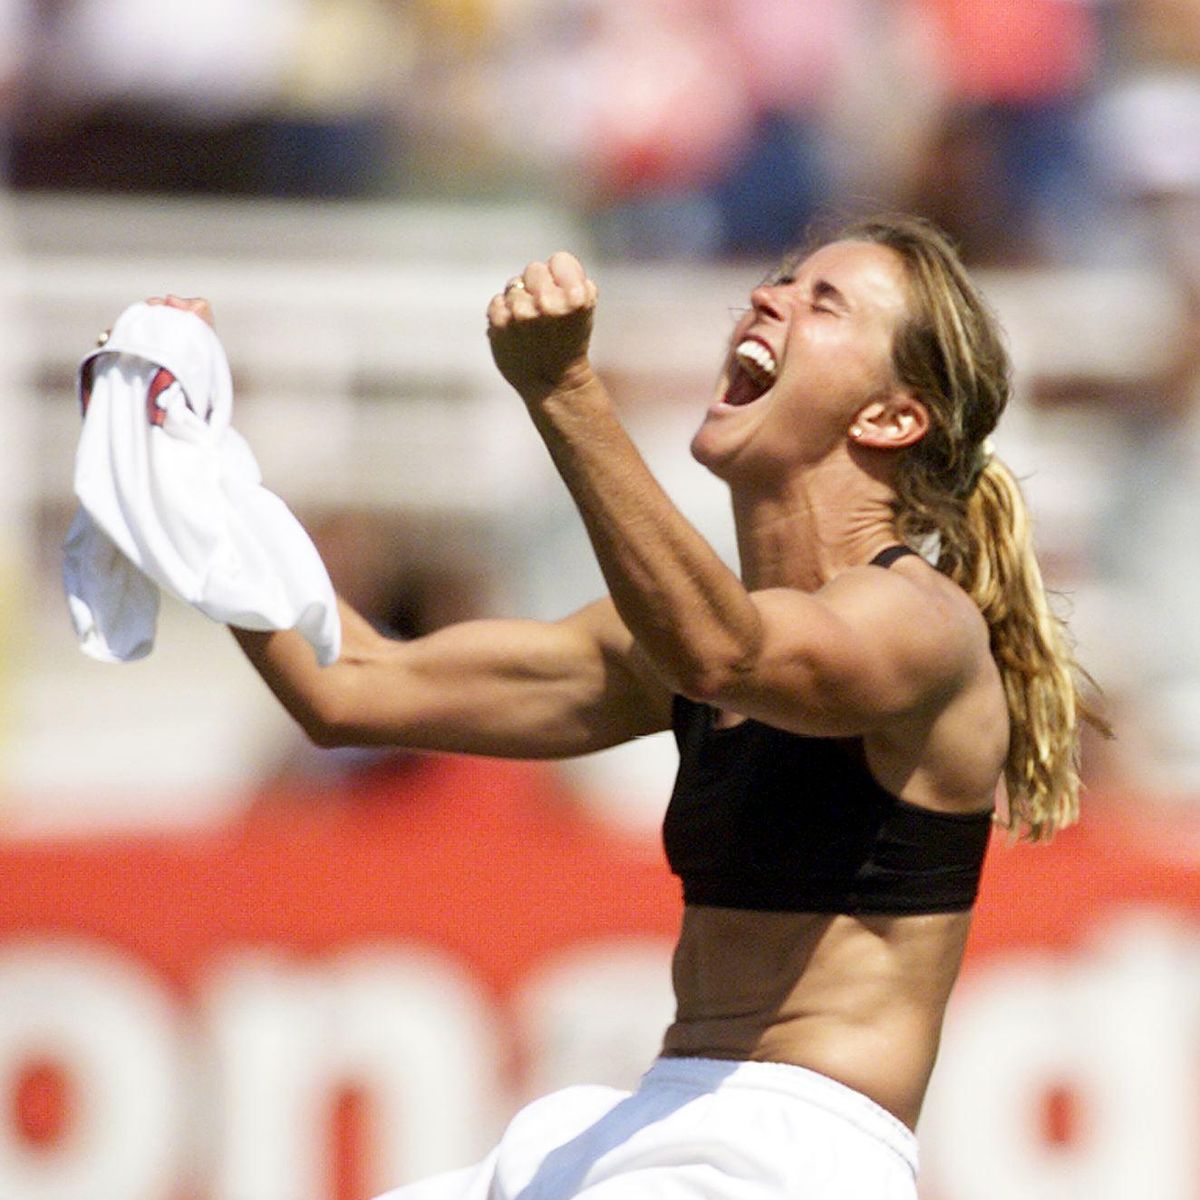 The Sports Bra Gave Us the Freedom to Compete